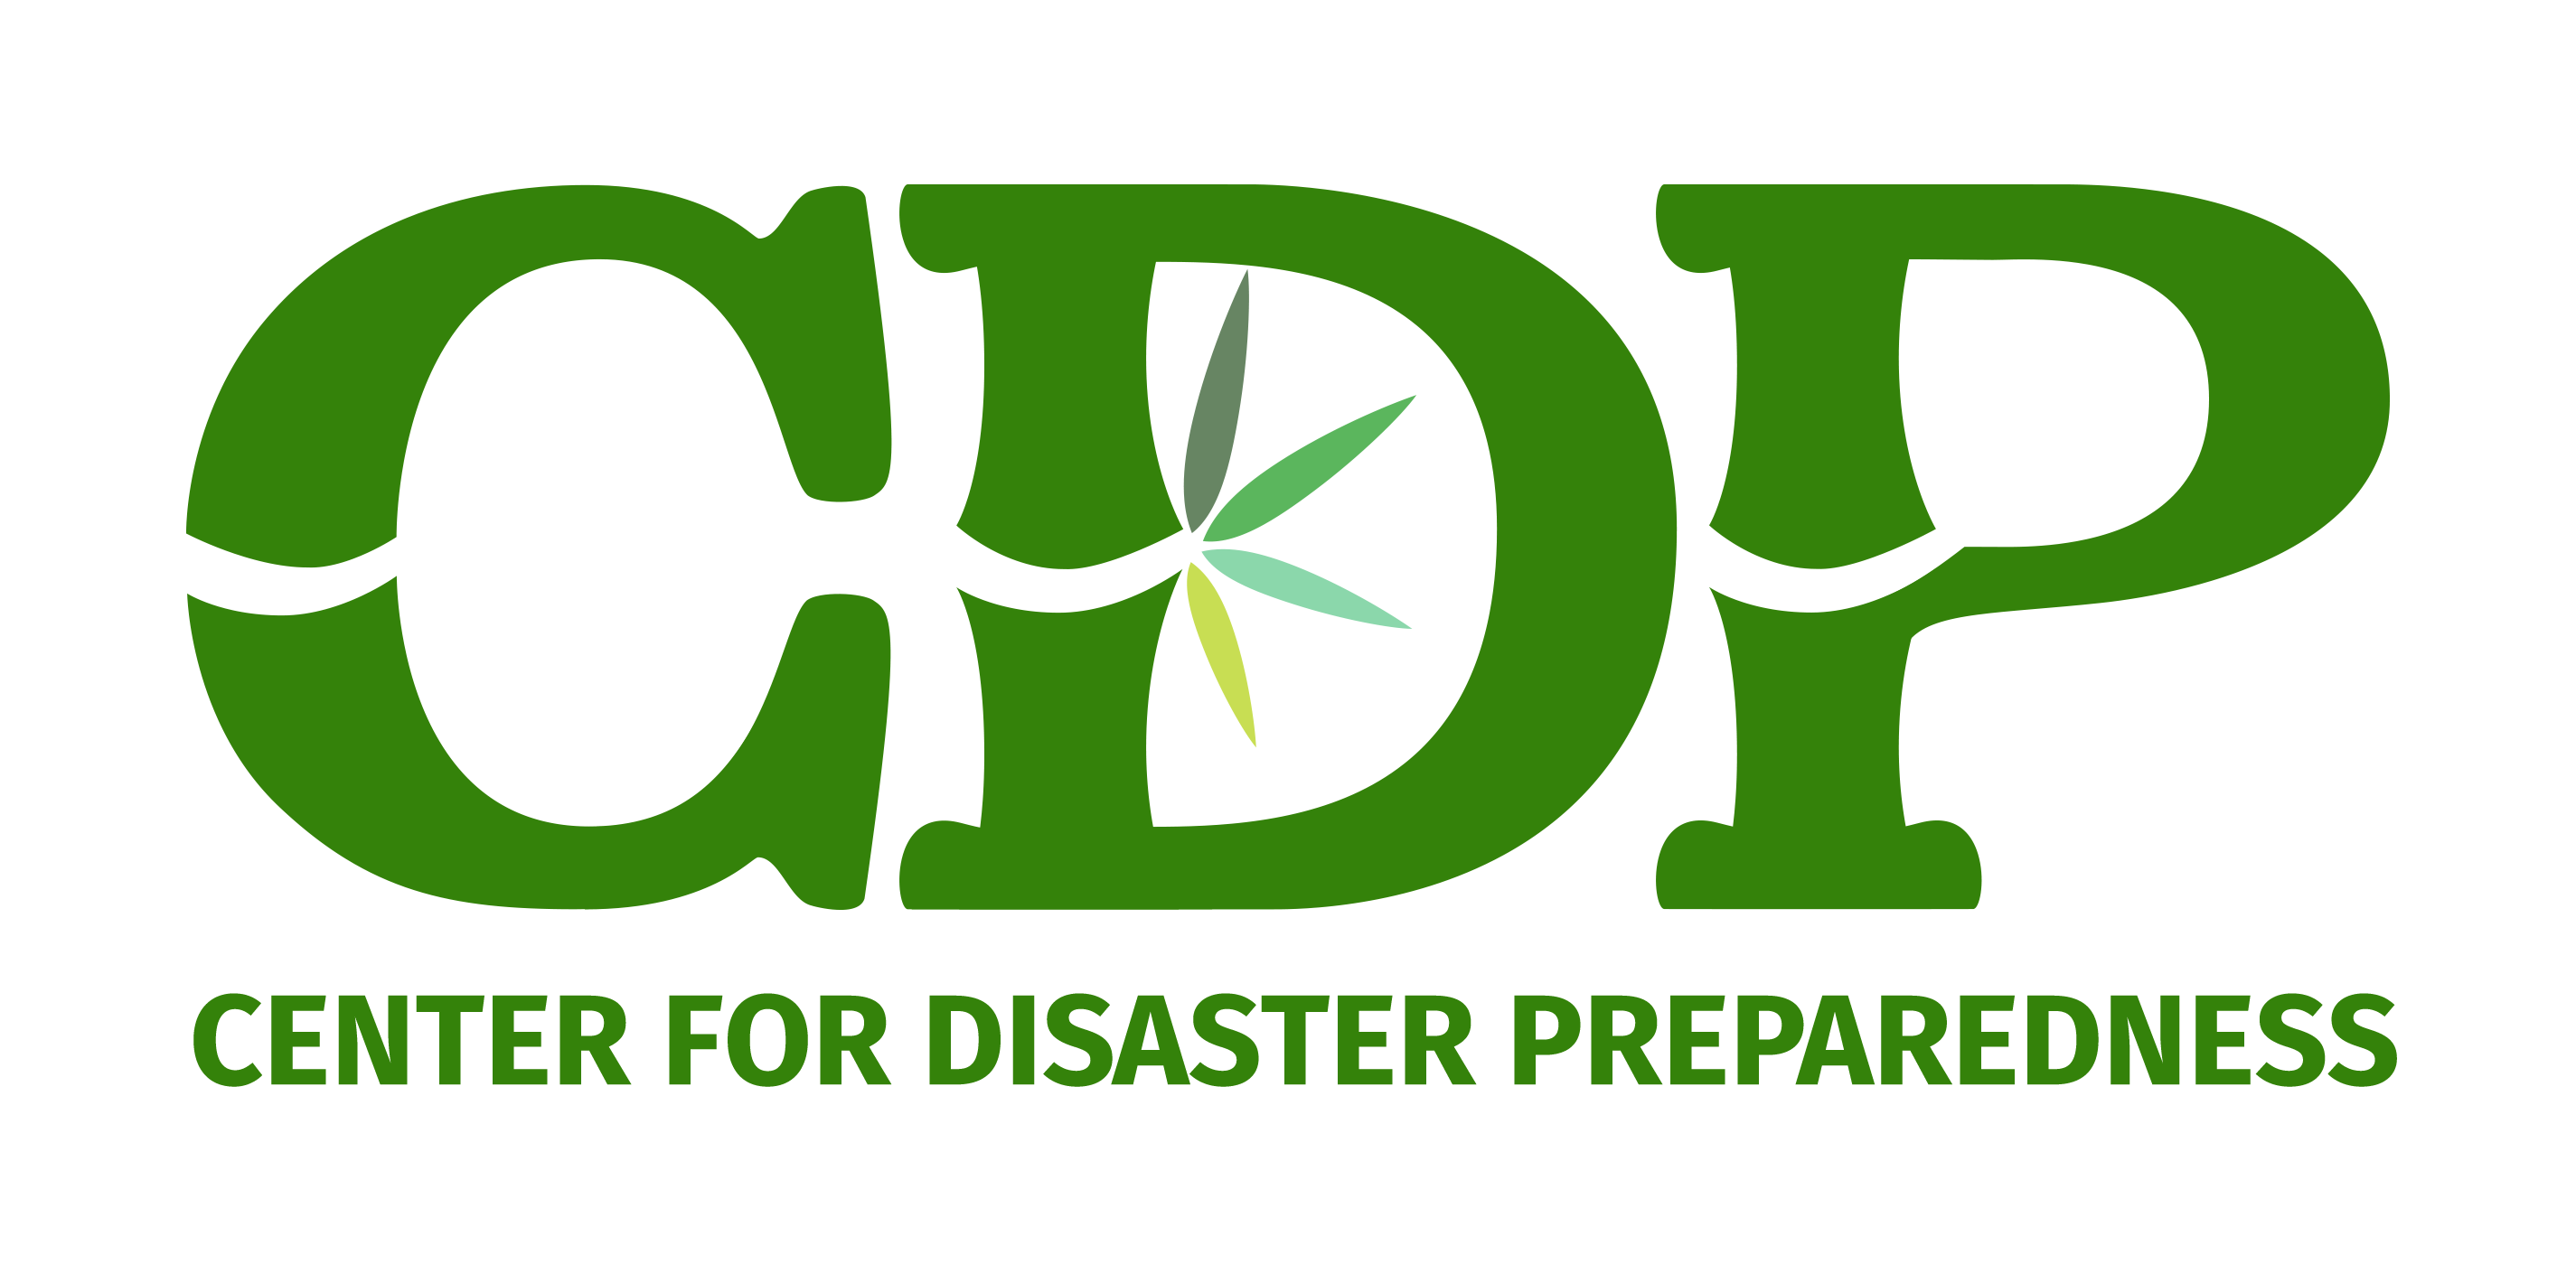 Emergency clipart disaster risk reduction, Emergency disaster risk  reduction Transparent FREE for download on WebStockReview 2020